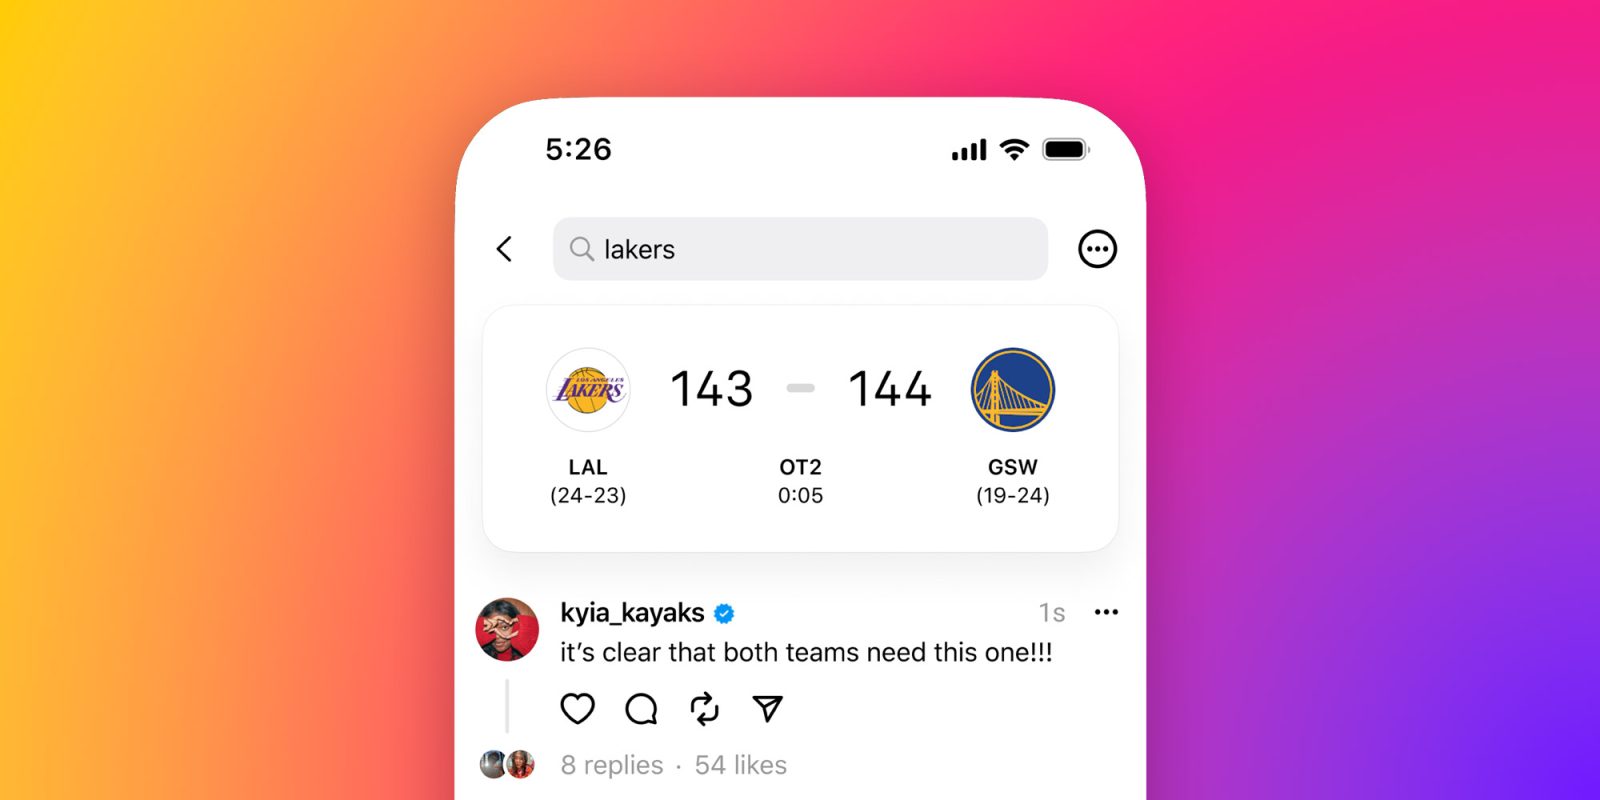 Thread will now show sports scores starting with NBA games